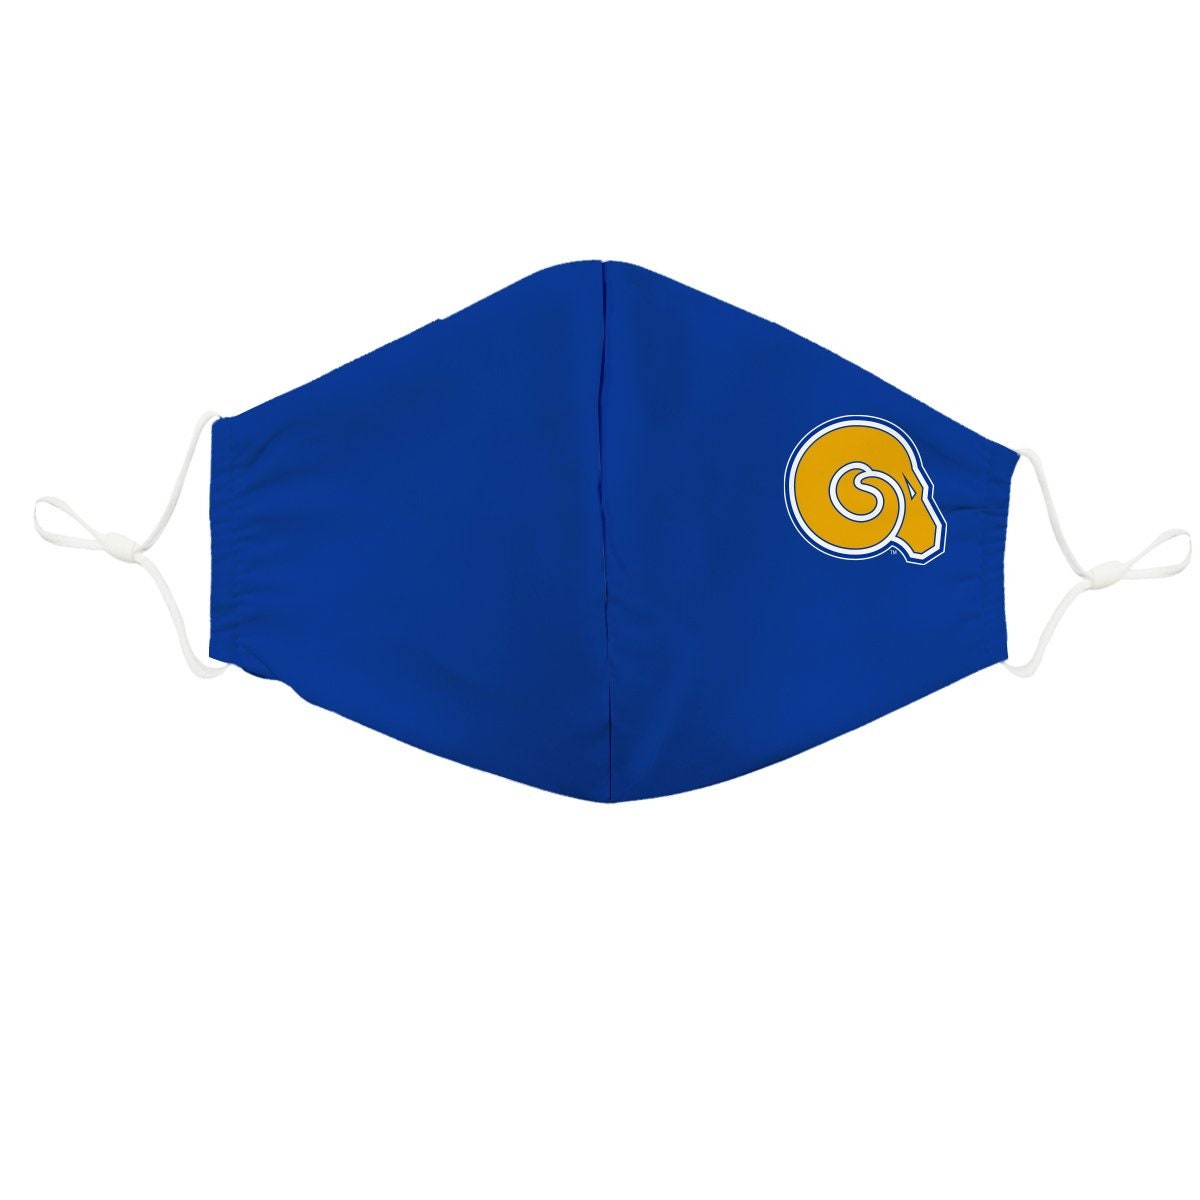 Albany State Rams Face Mask Solid Blue Asu